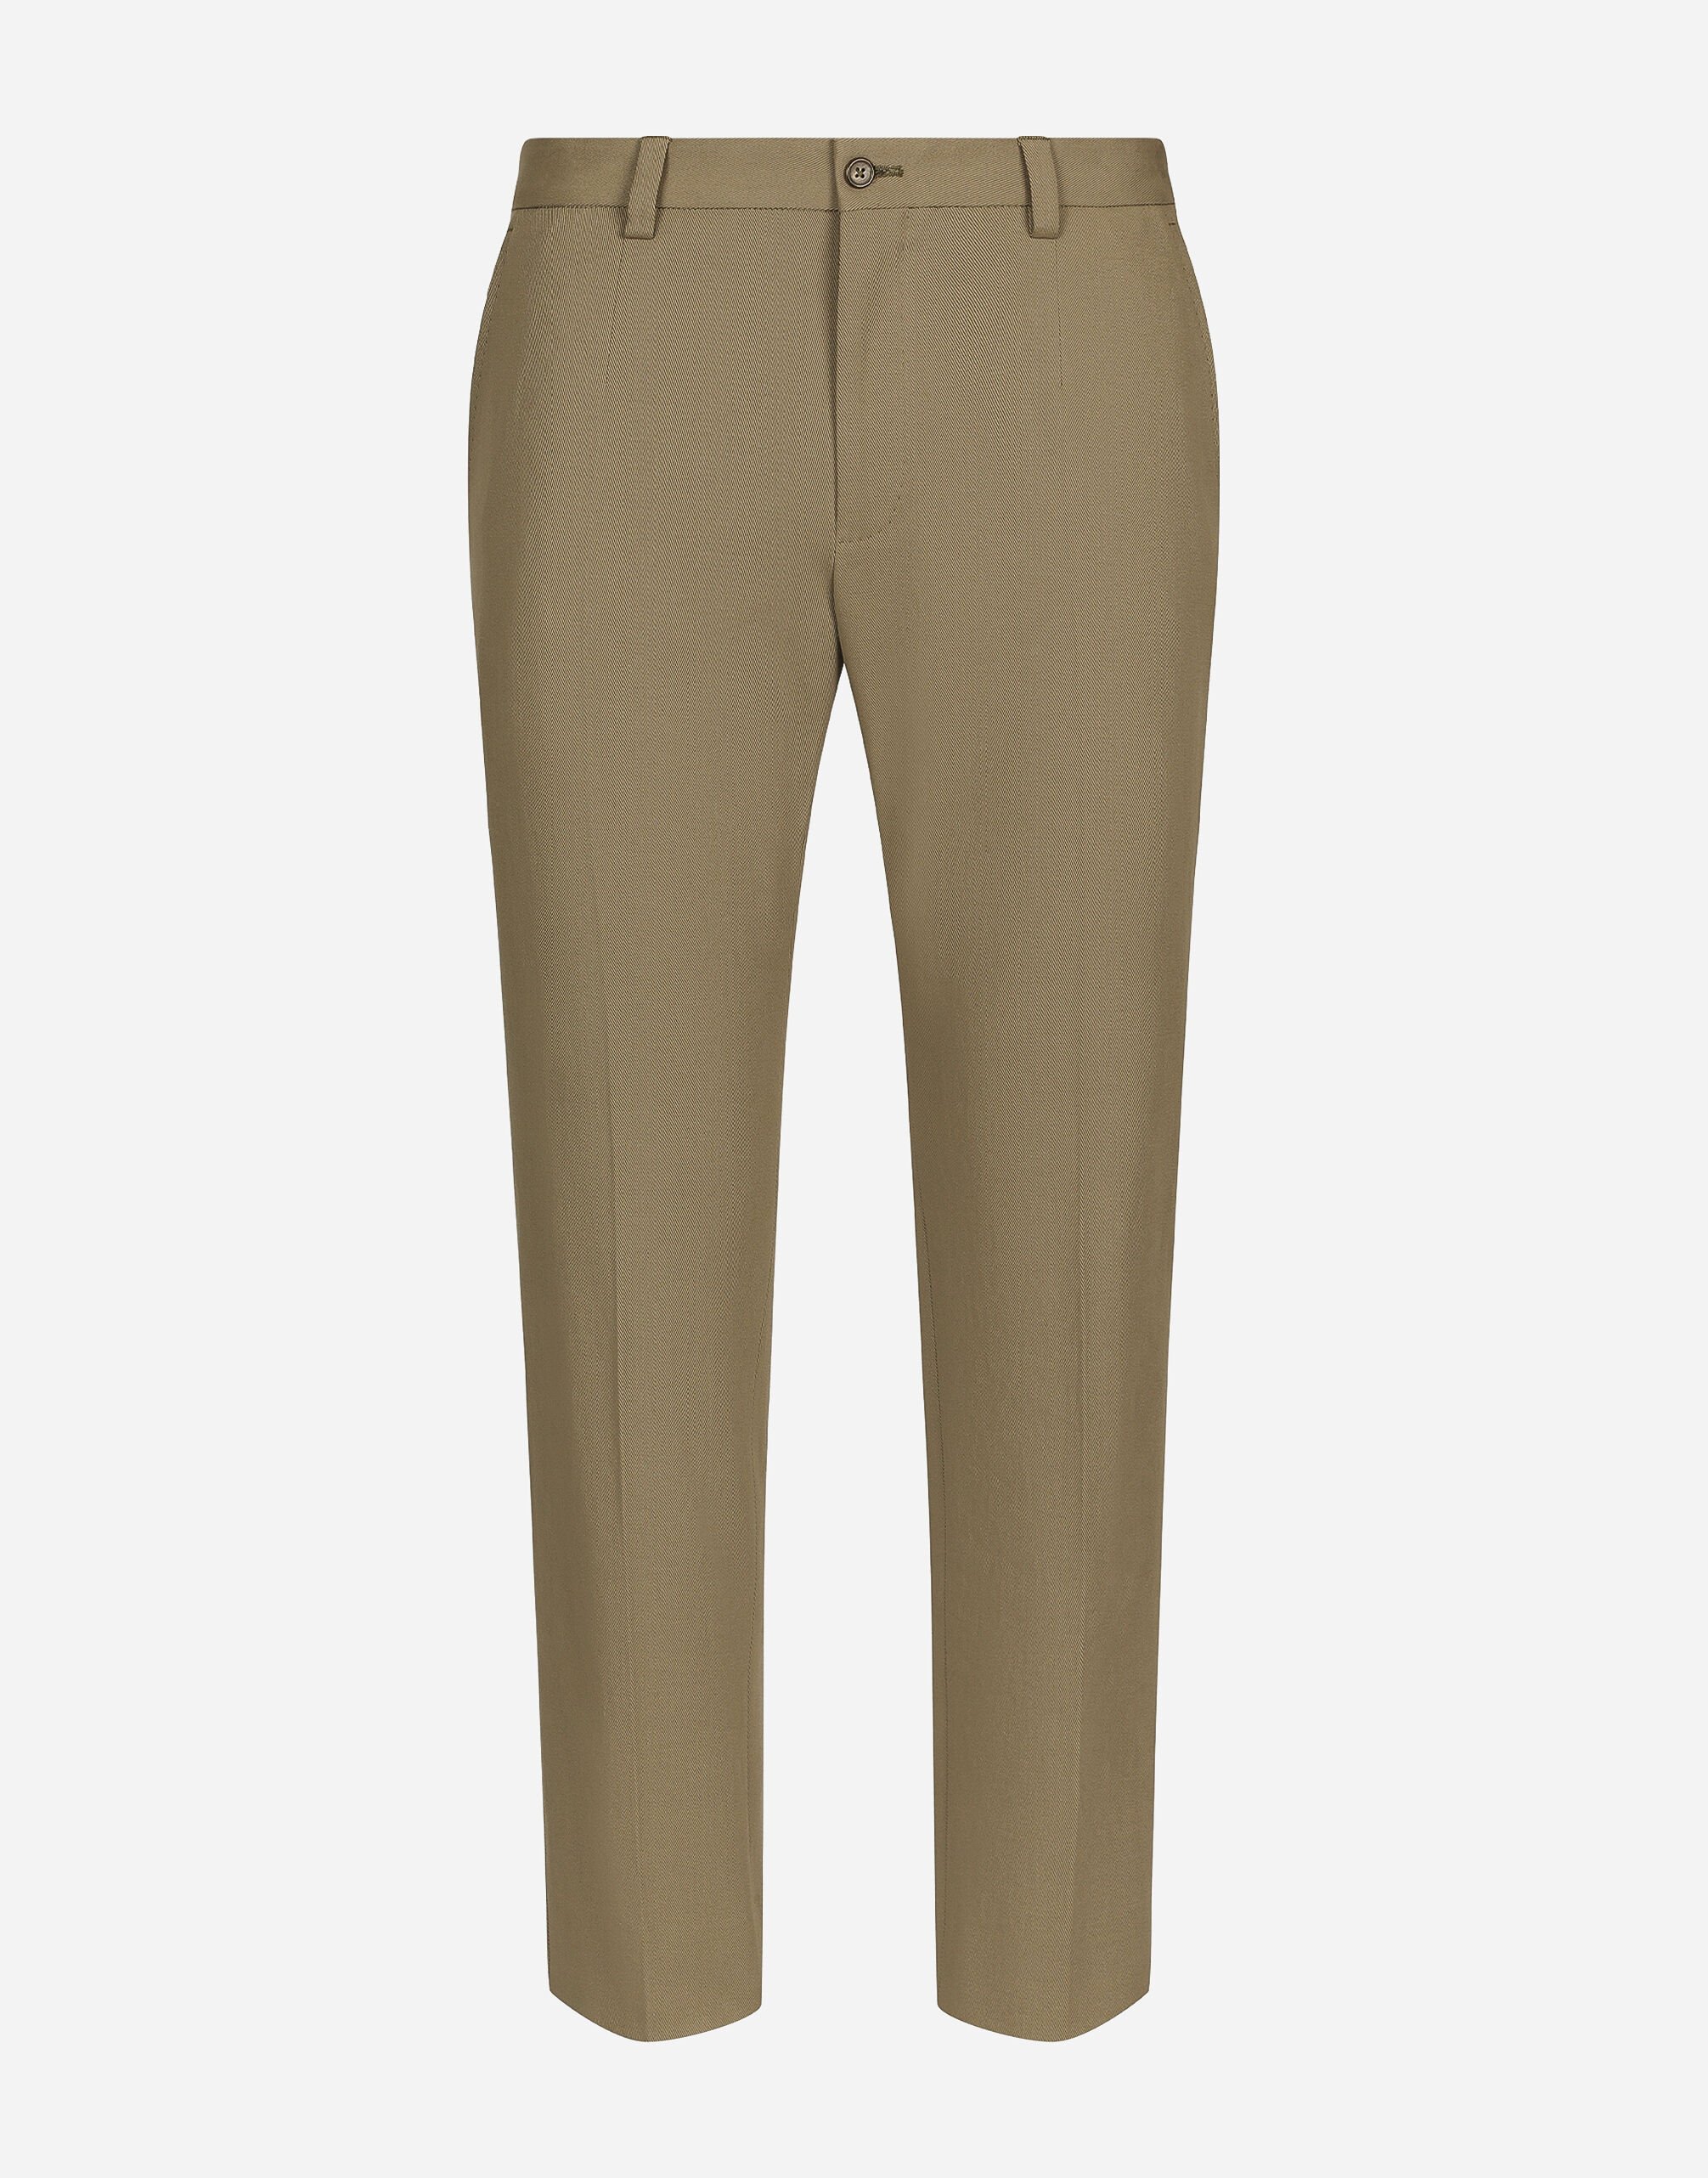 Dolce&Gabbana Stretch cotton and cashmere pants Brown G2NW1TFU4C2